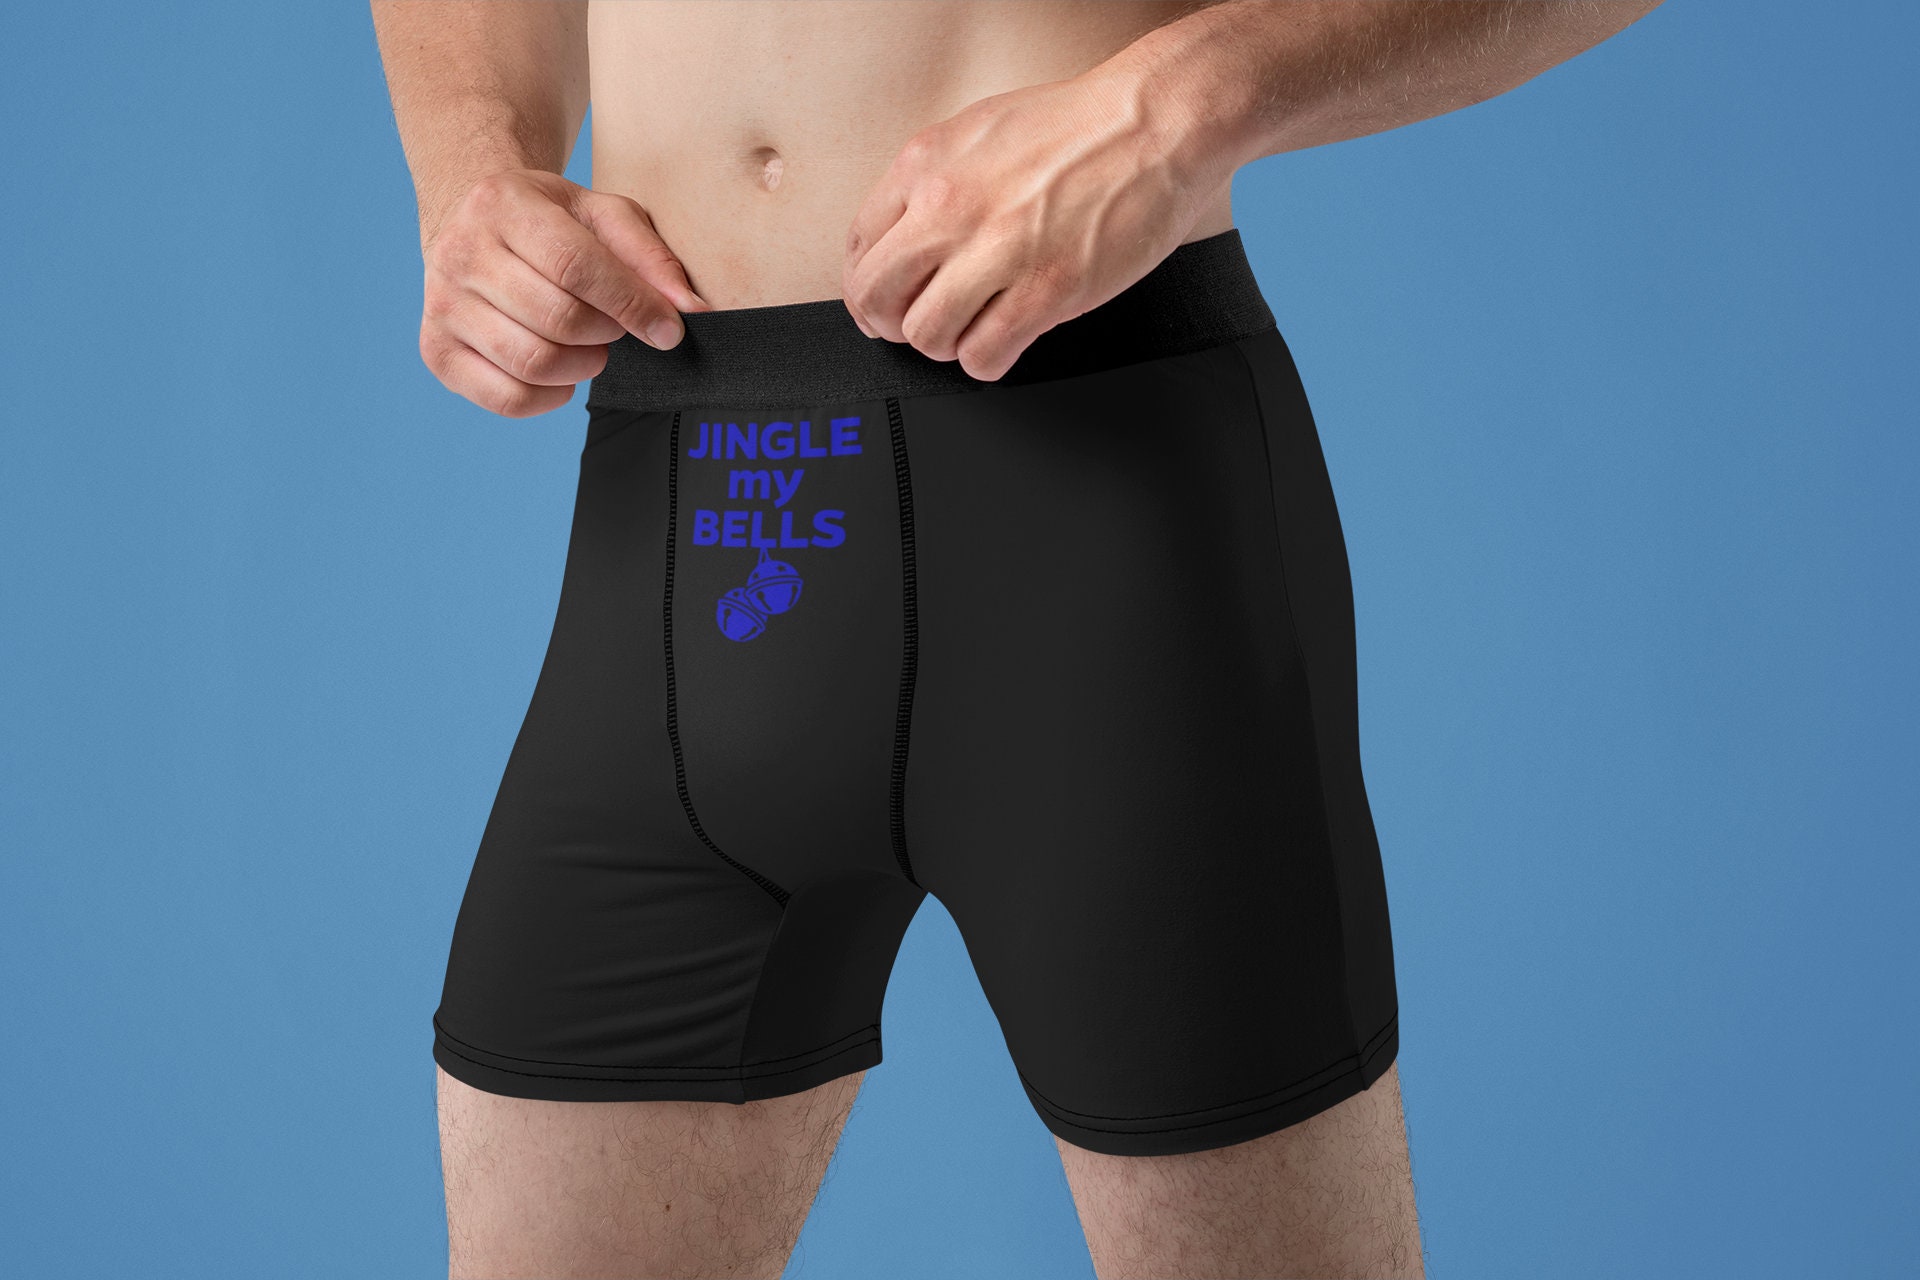 DADDY Boxer Briefs, Sexy Papi Boxers, BDSM Clothing Kinky Yes Daddy, Sub  Dom, Sexy Gift for Daddy, Sir Boxers, Sex Room Toys, Adult Gag Gift 